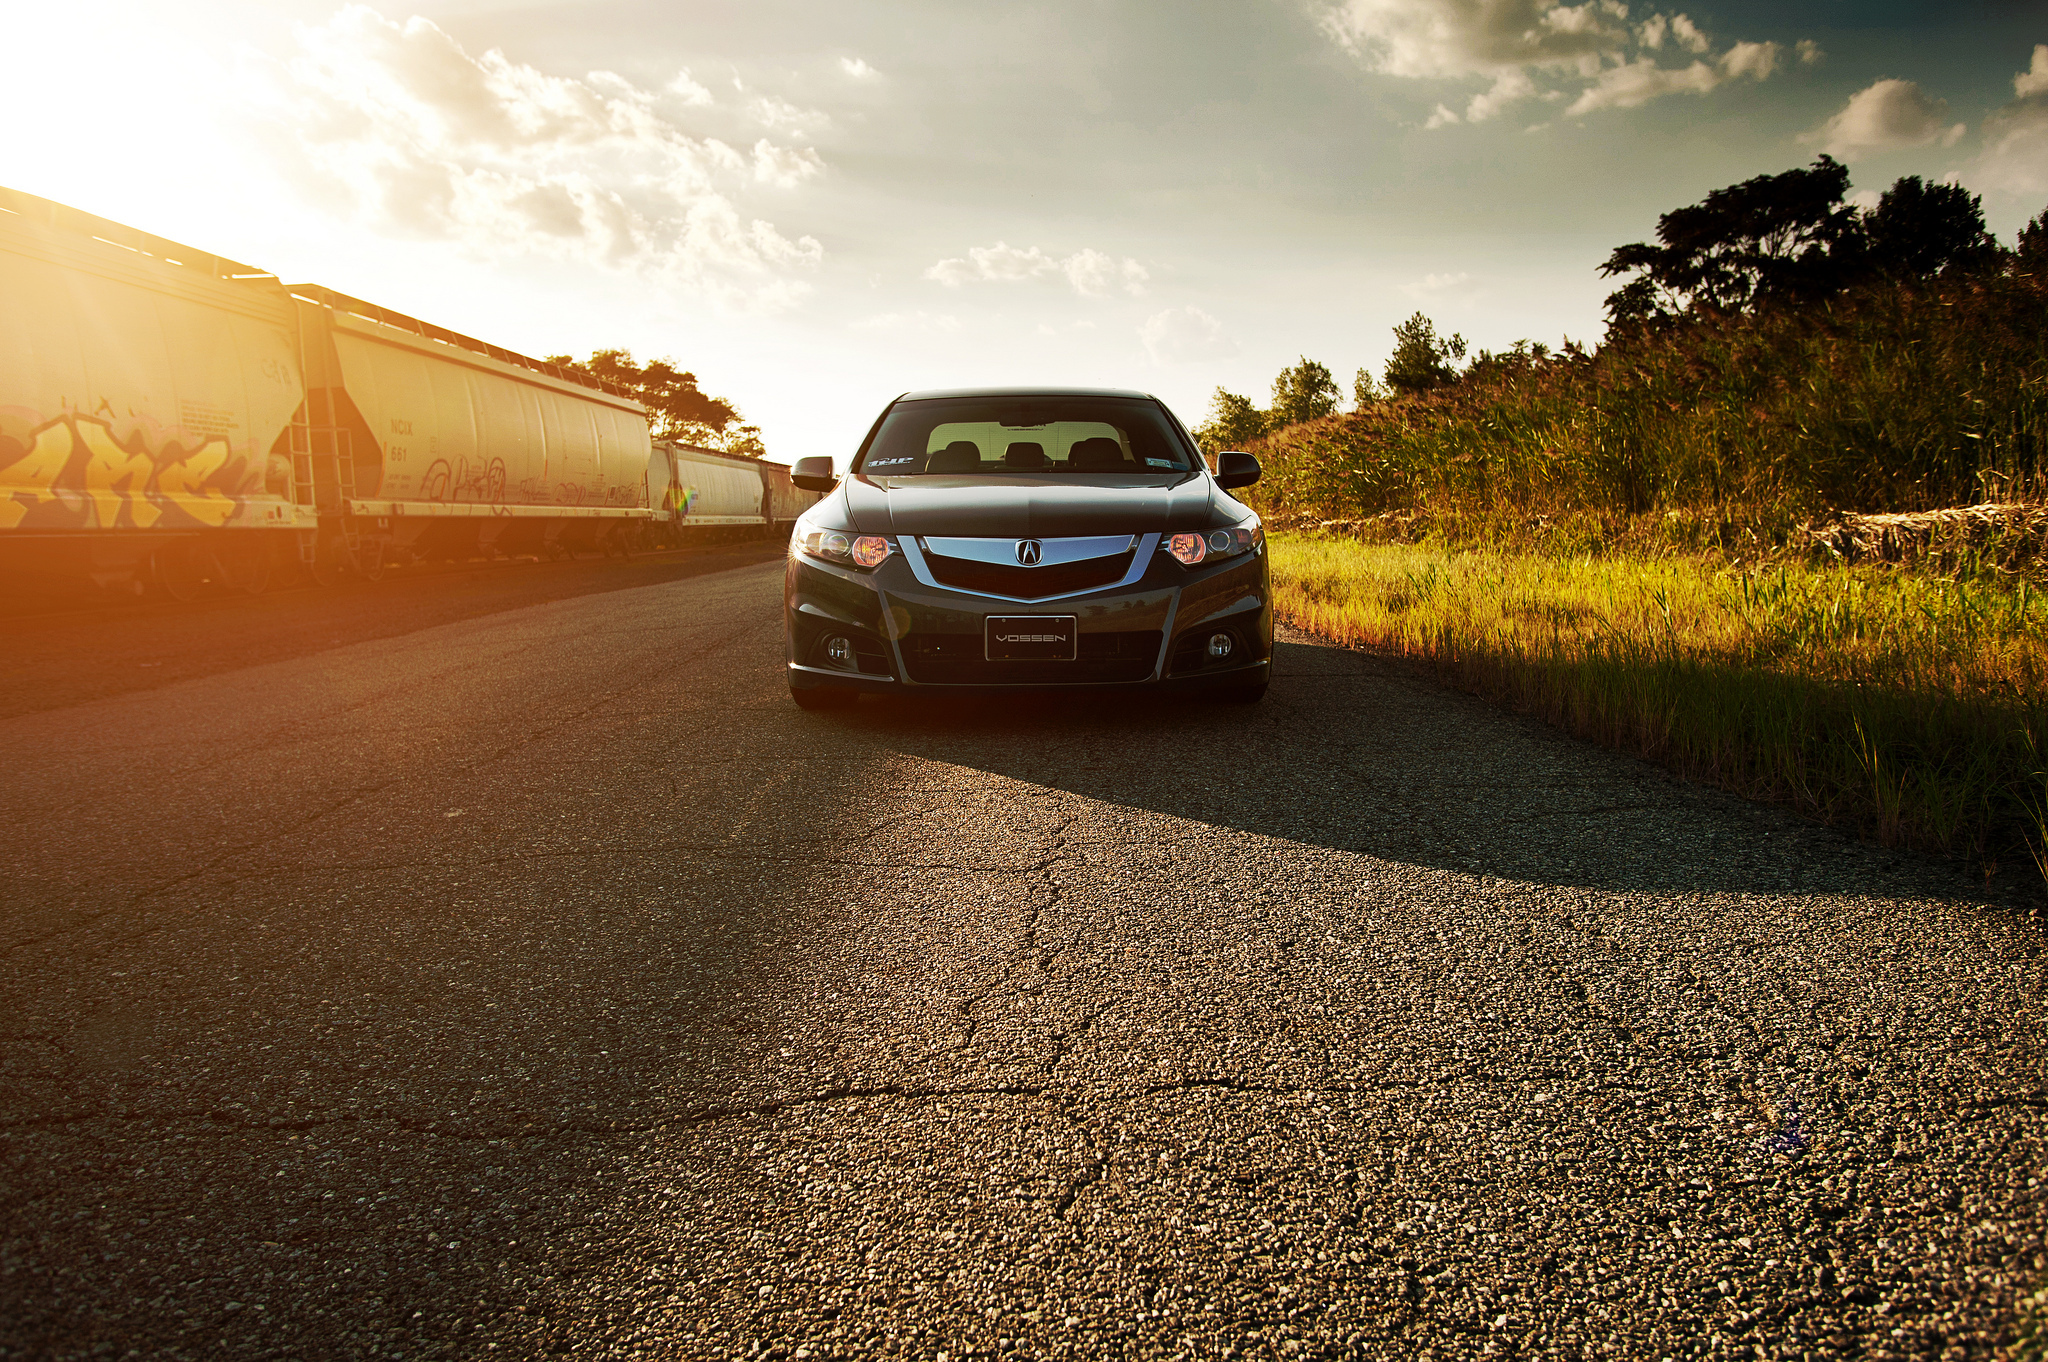 Mobile Wallpaper Honda tsx, accord, front view, acura